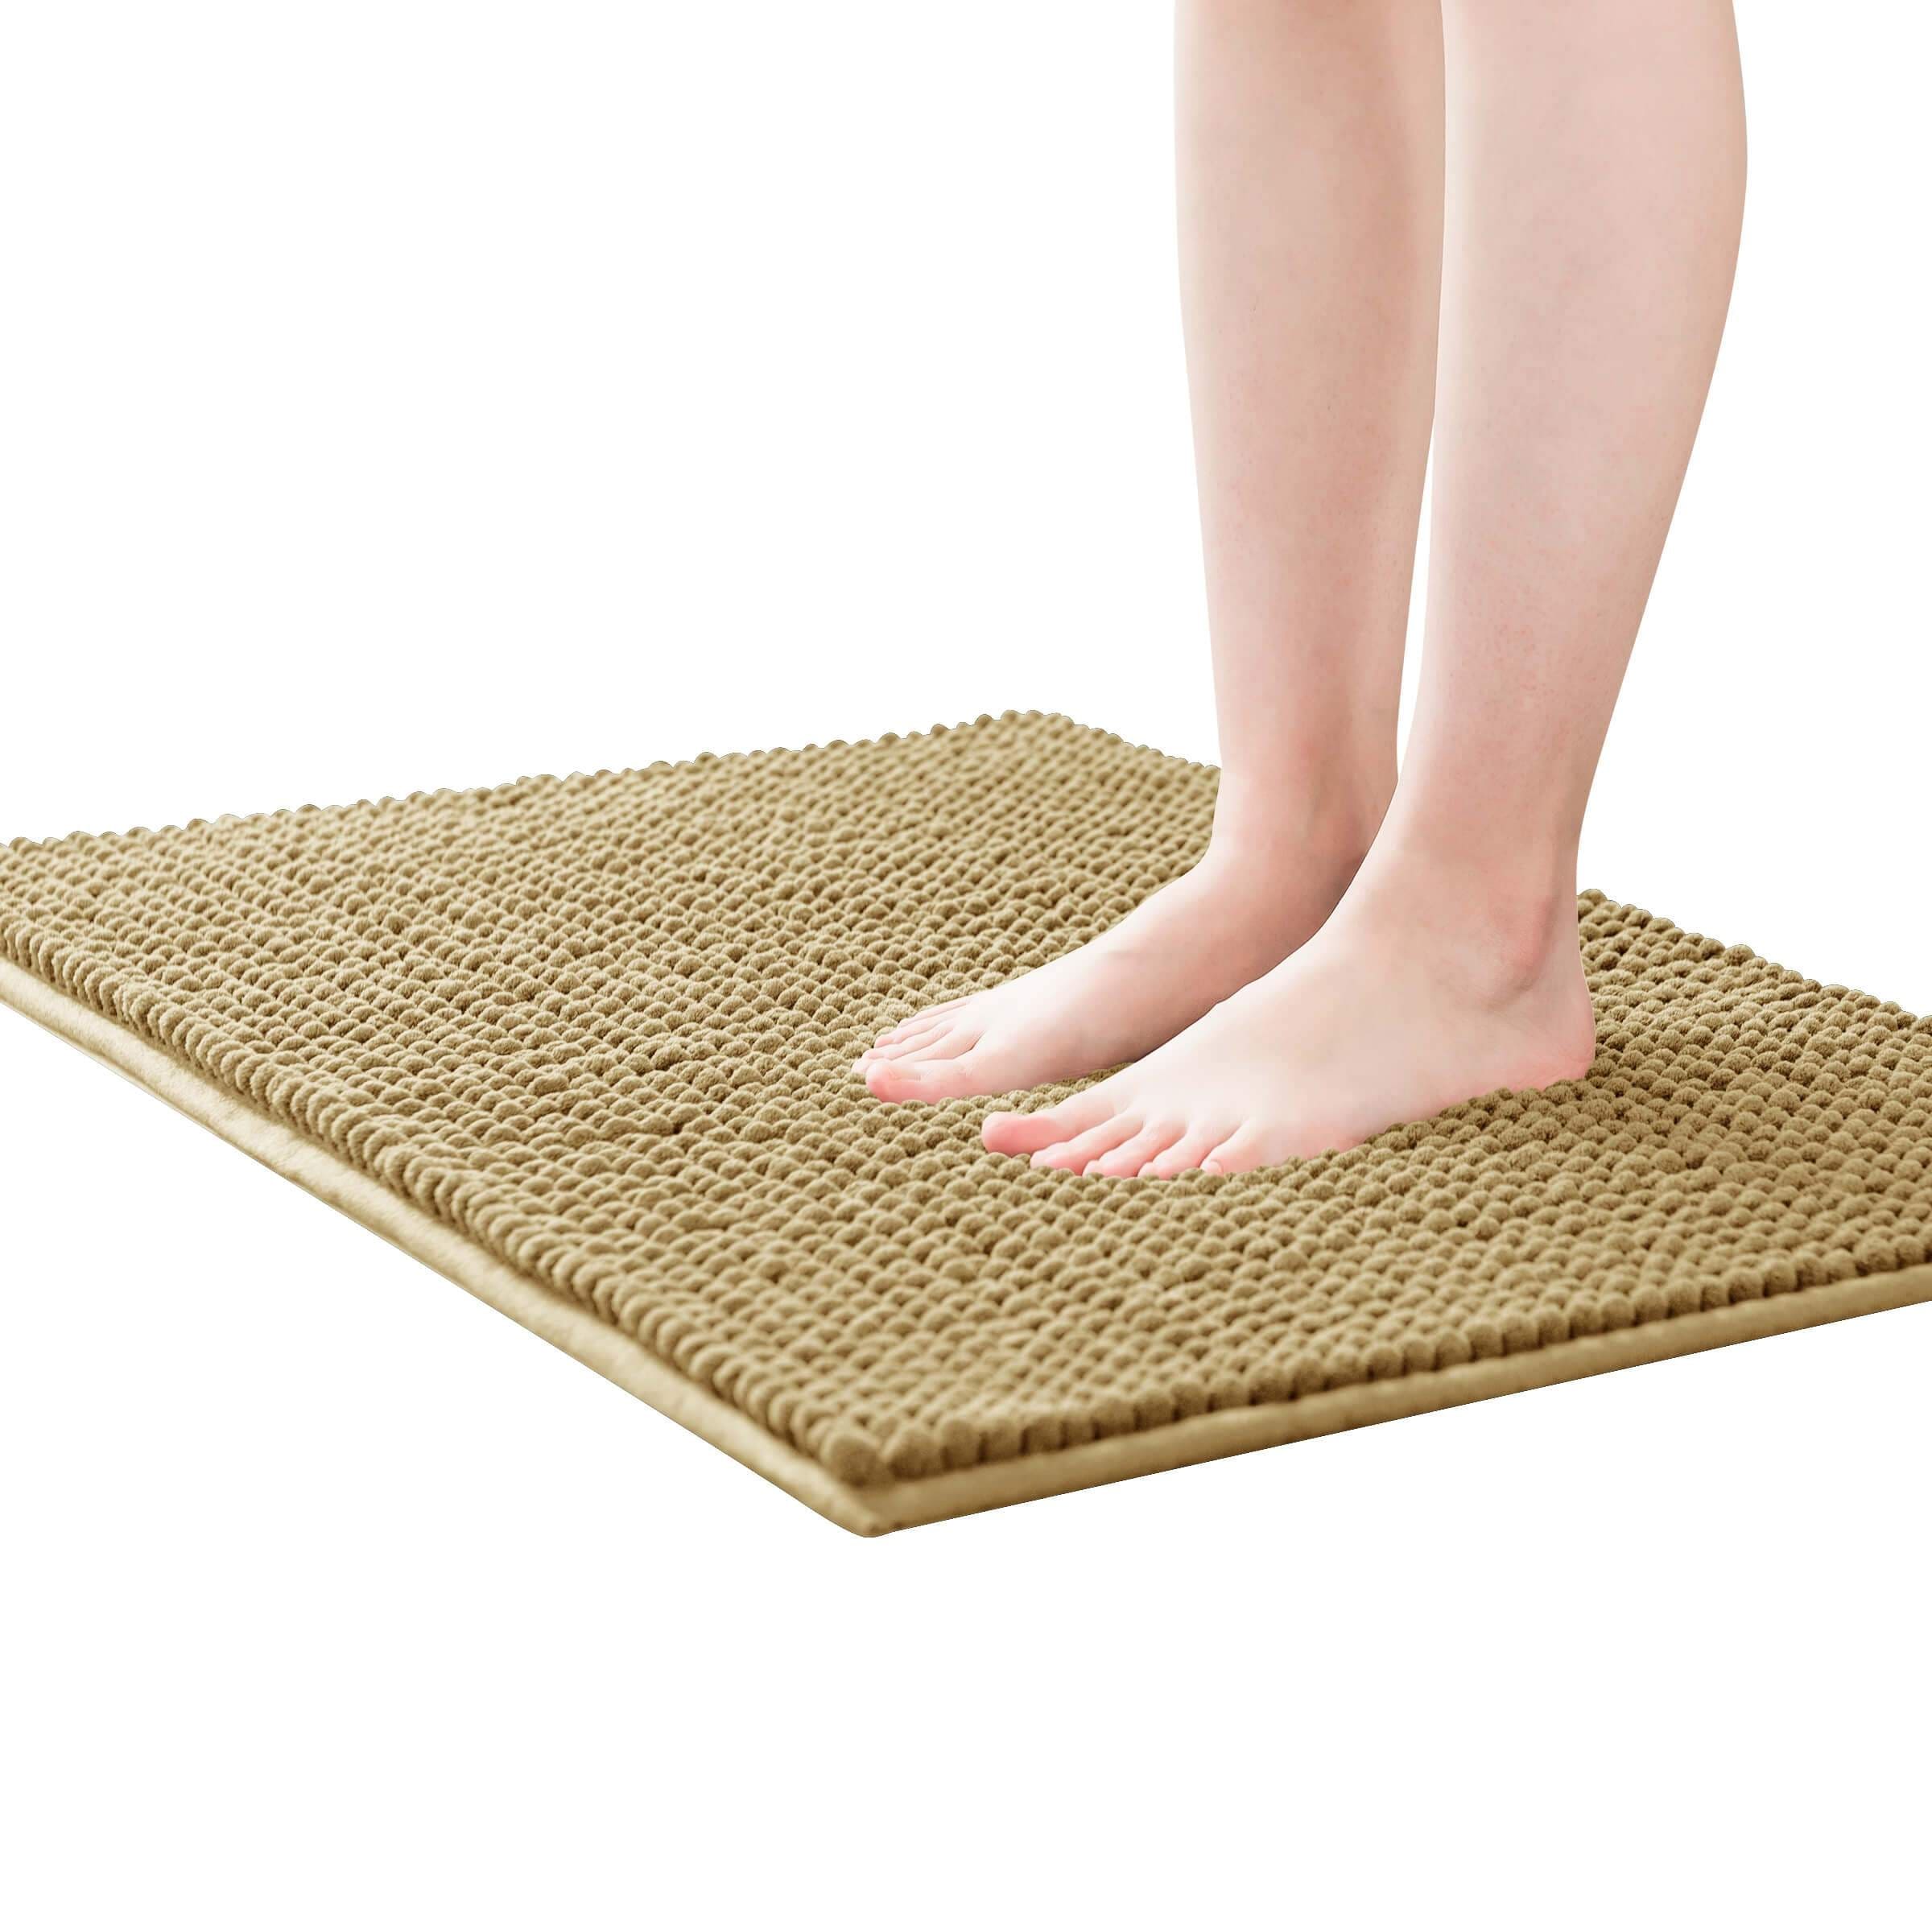 https://ak1.ostkcdn.com/images/products/is/images/direct/644238bd4c914095969542fff3c7b9658dceb449/Subrtex-Chenille-Bathroom-Rugs-Soft-Super-Water-Absorbing-Shower-Mats.jpg